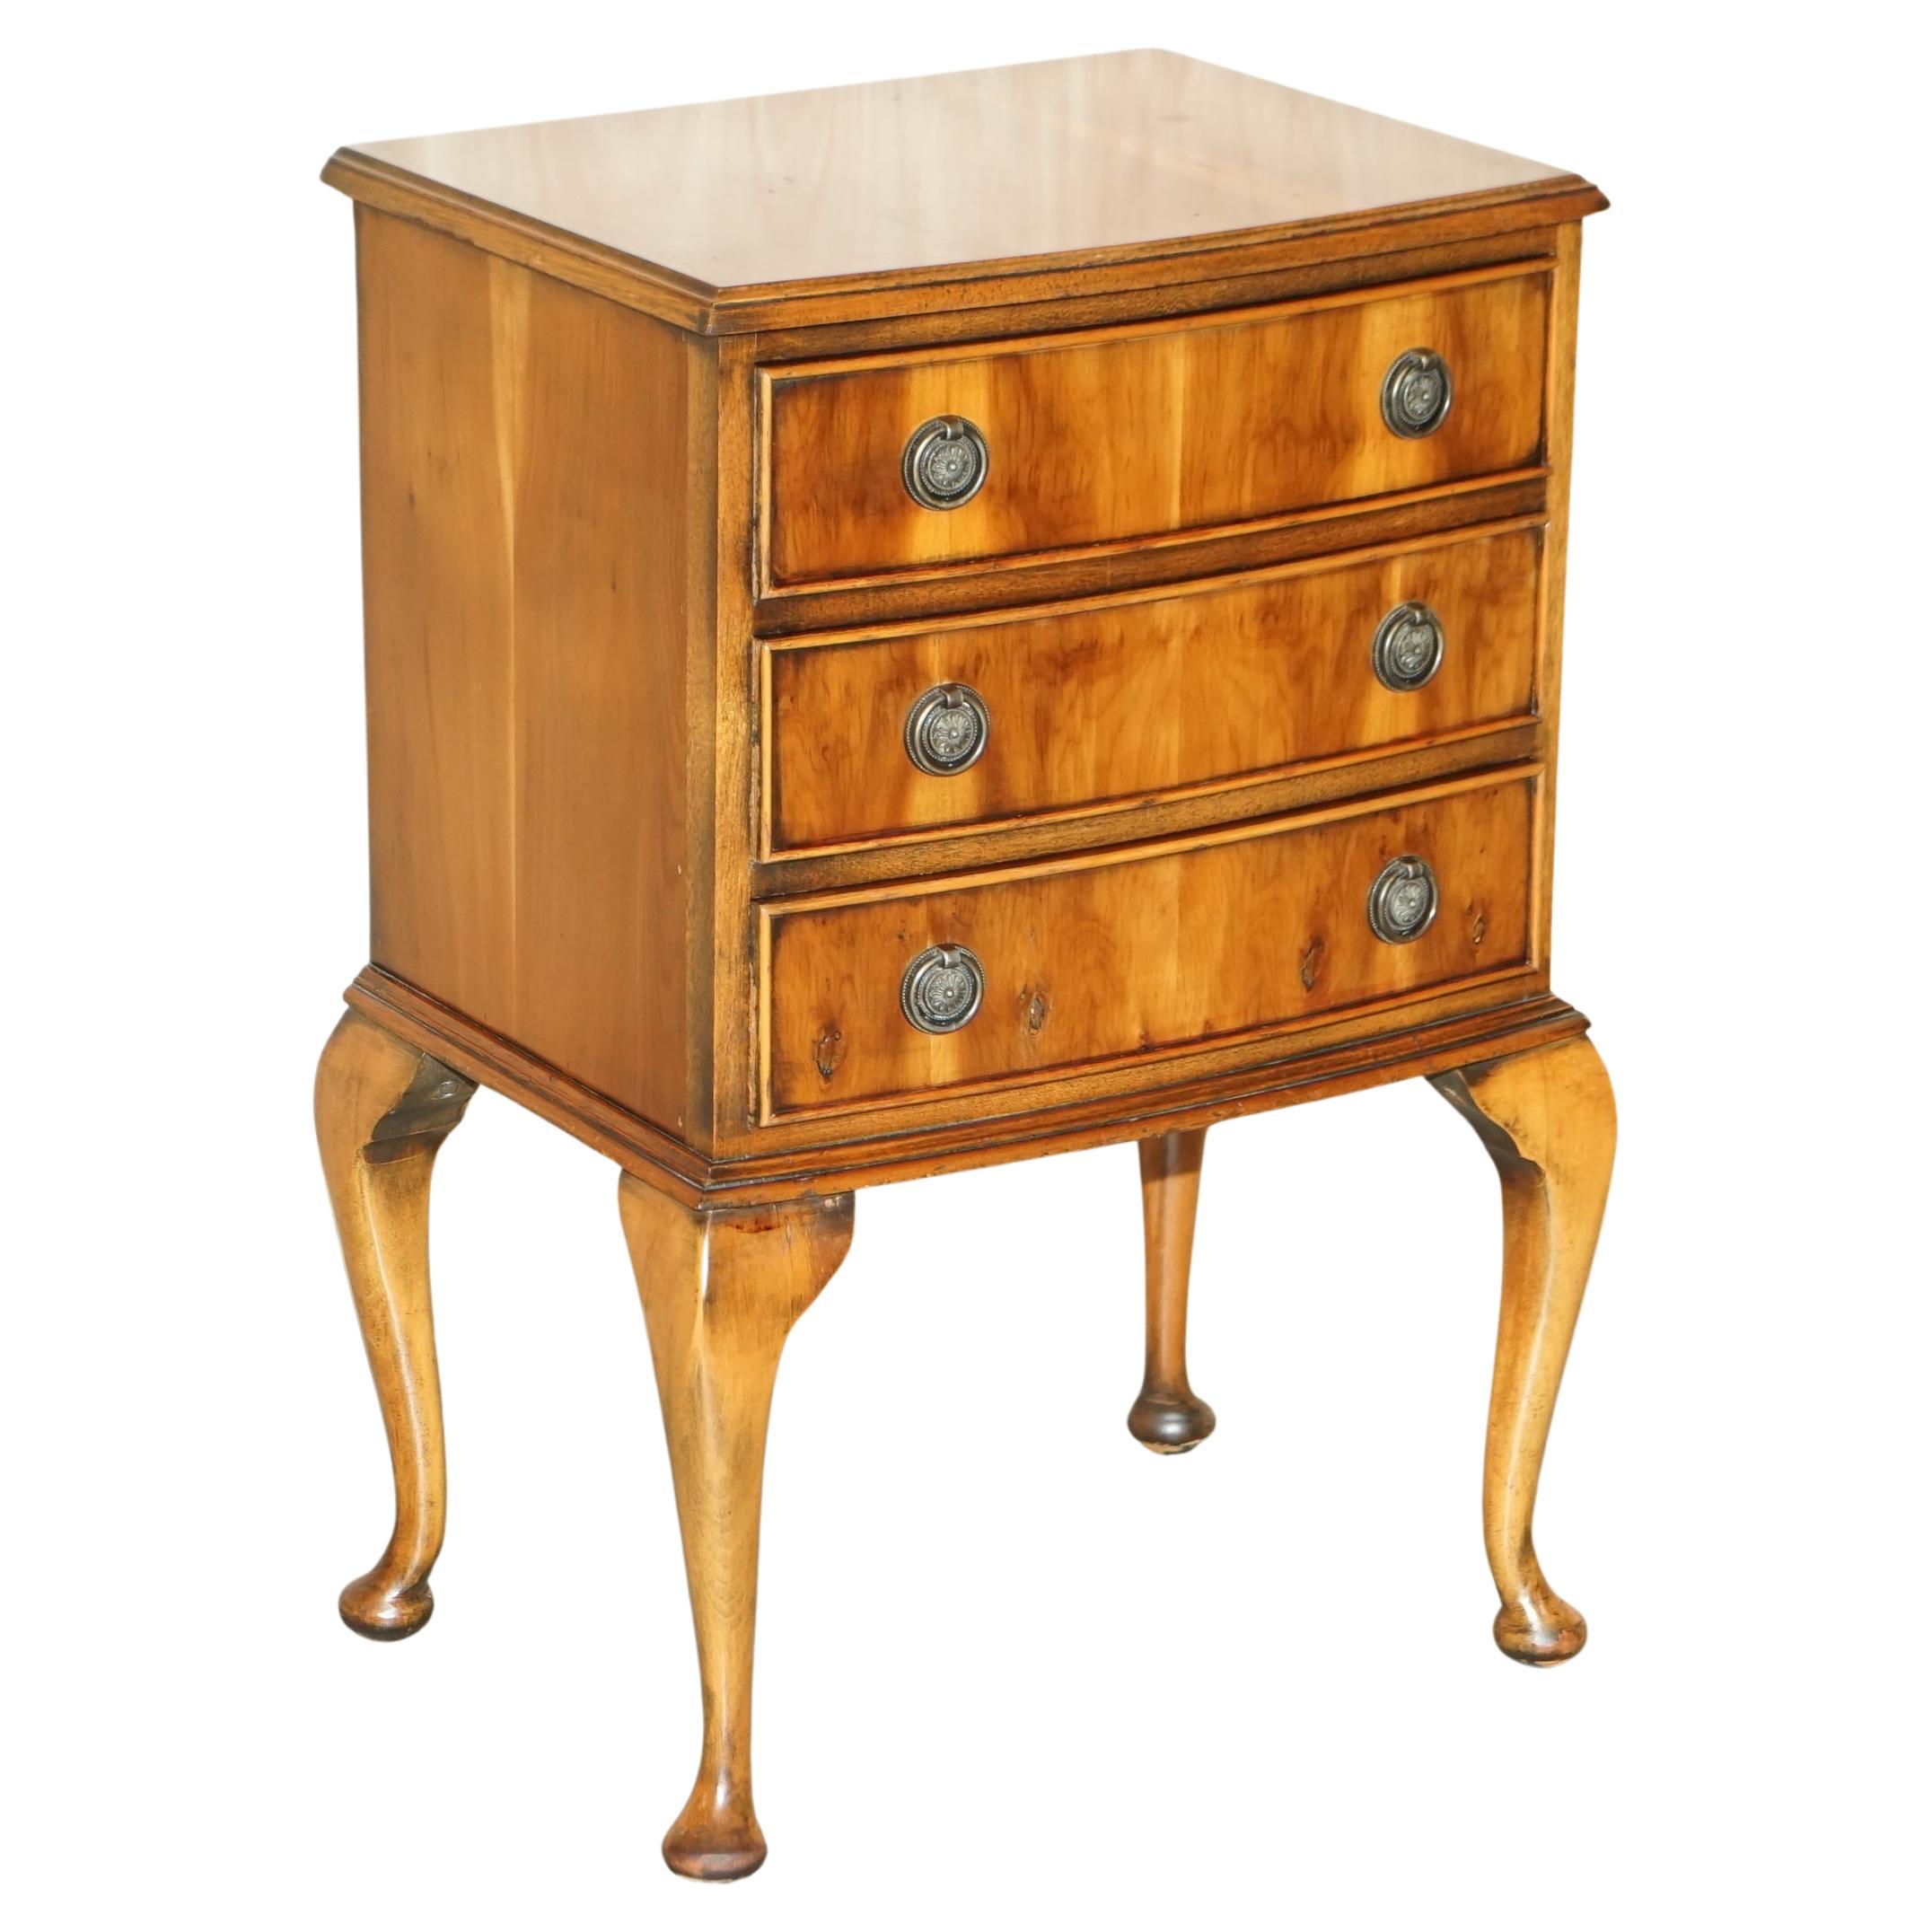 CIRCA 1940''s BURR YEW WOOD BOW FRONTED BEDSIDE SIDE TABLE CHEST OF DRAWERS